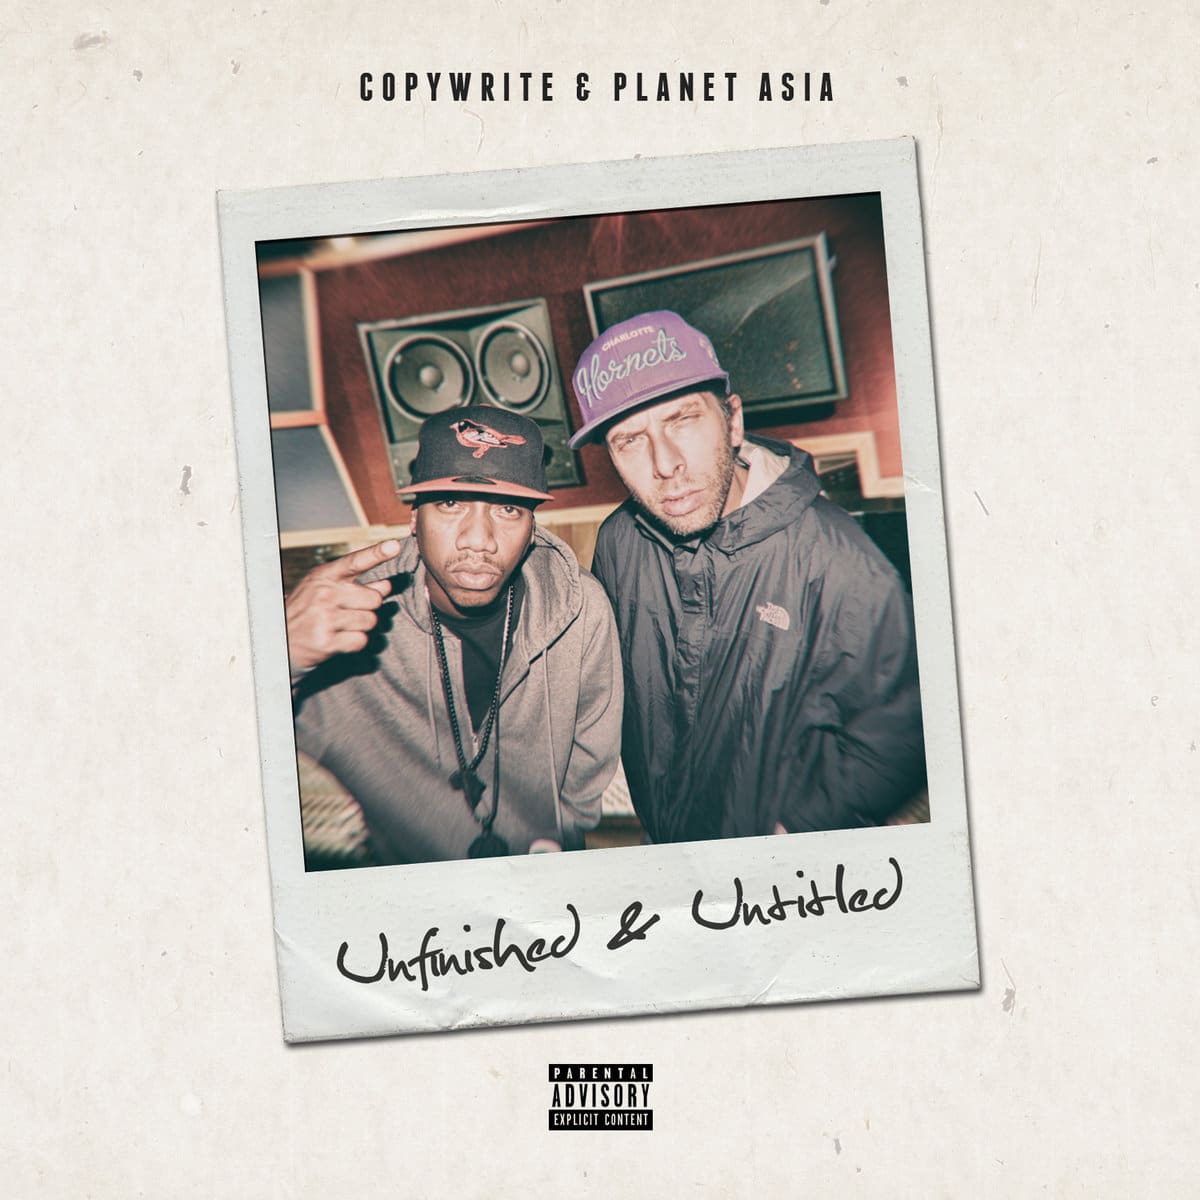 Copywrite & Planet Asia - "Unfinished & Untitled" (Release)